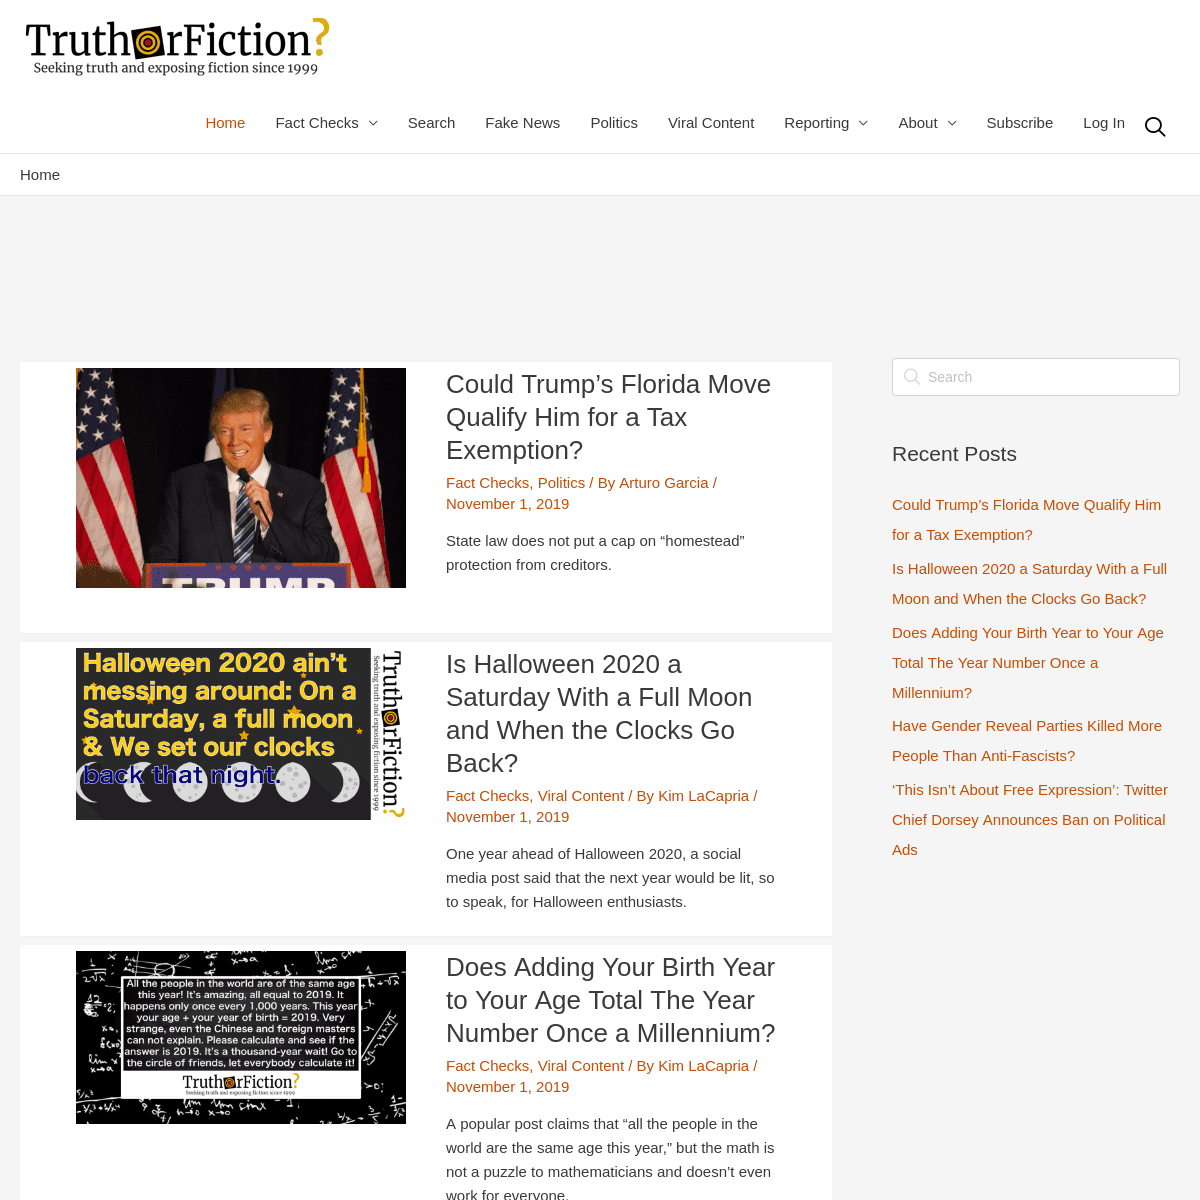 A complete backup of truthorfiction.com